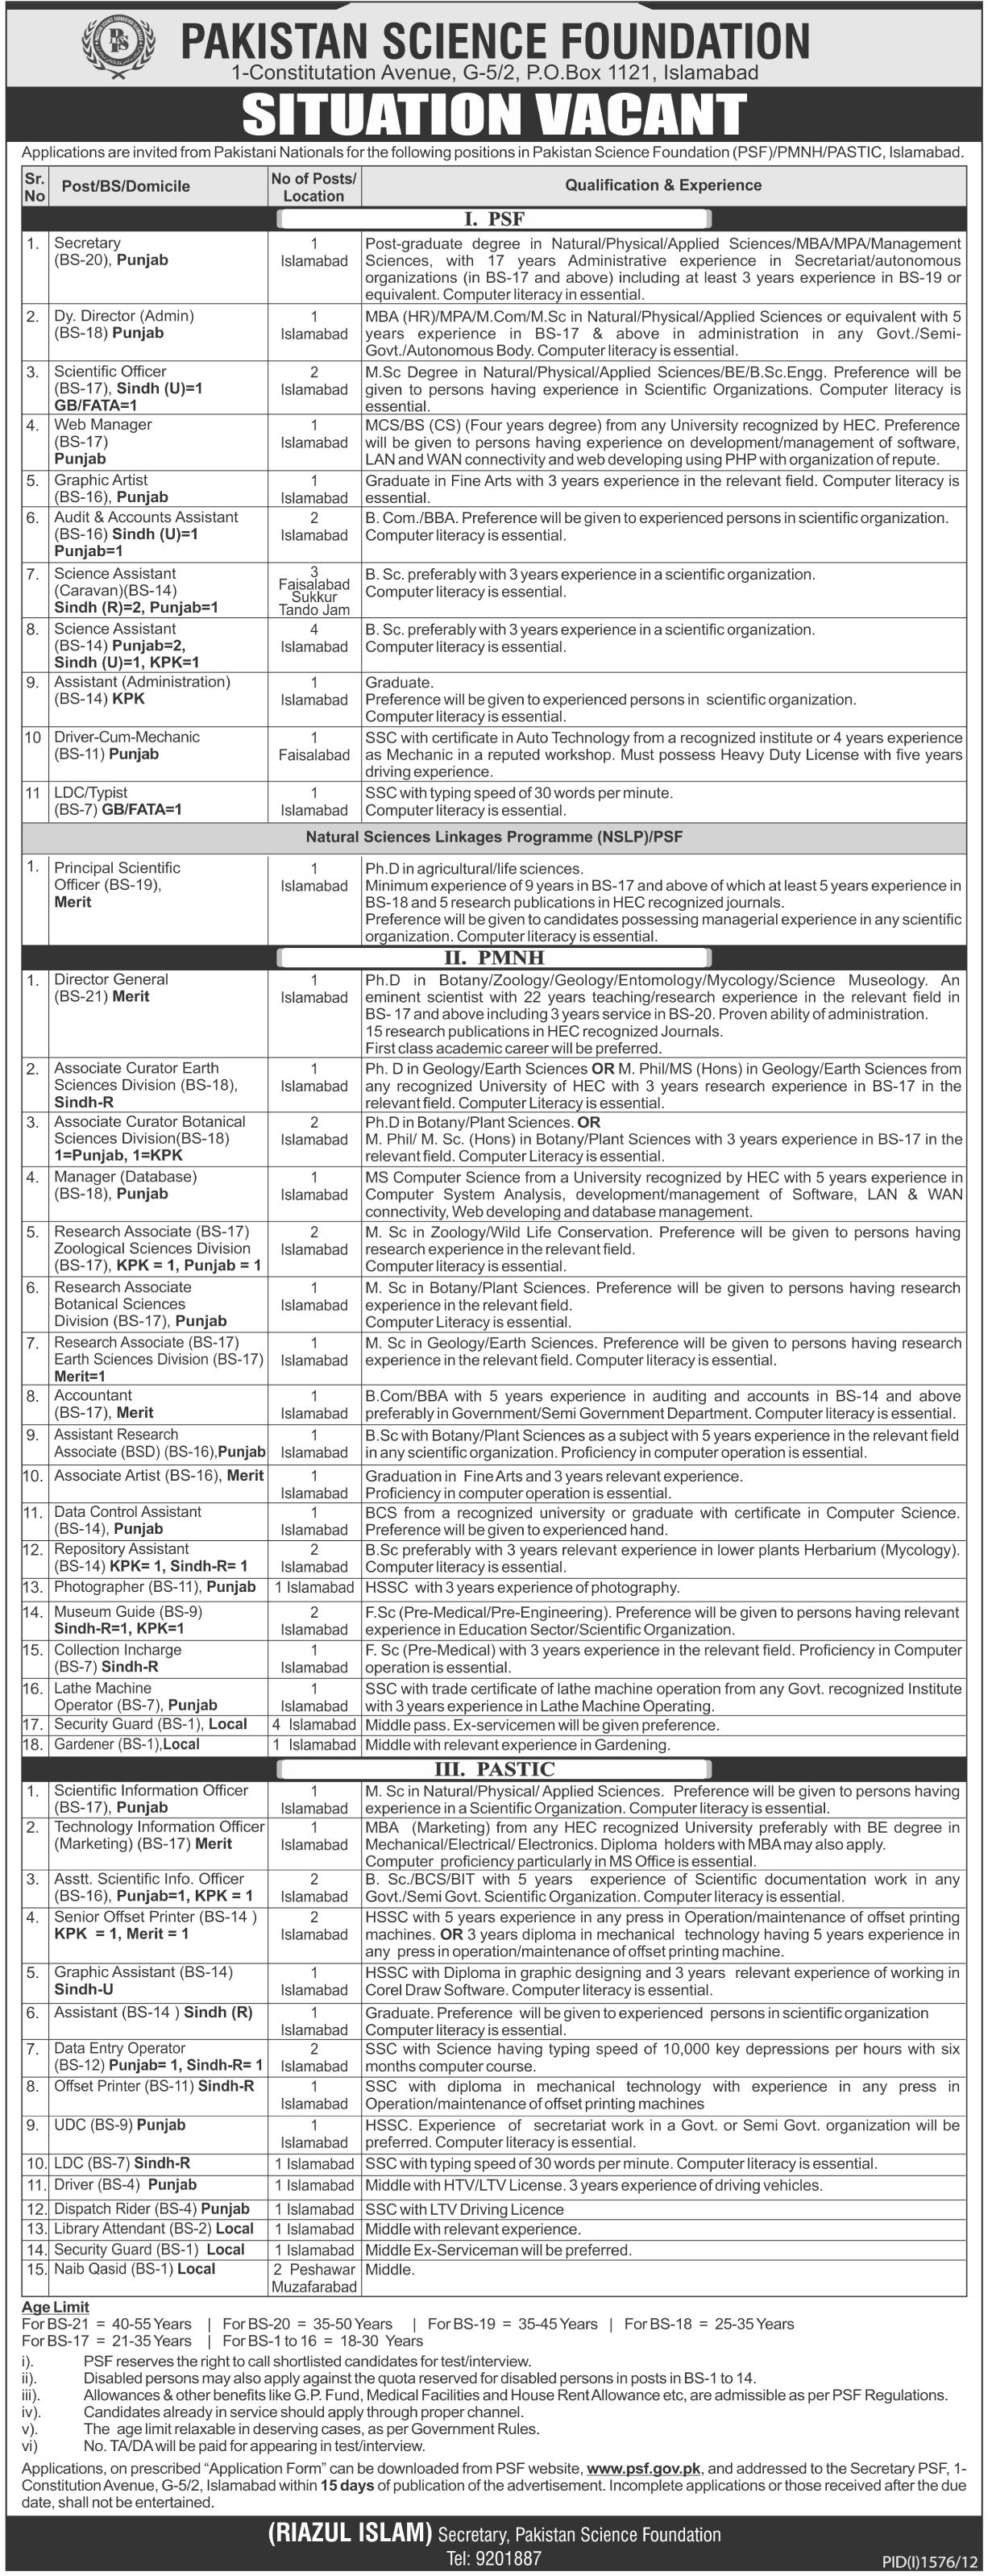 Pakistan Science Foundation (PSF), PMNH & PASTIC Jobs